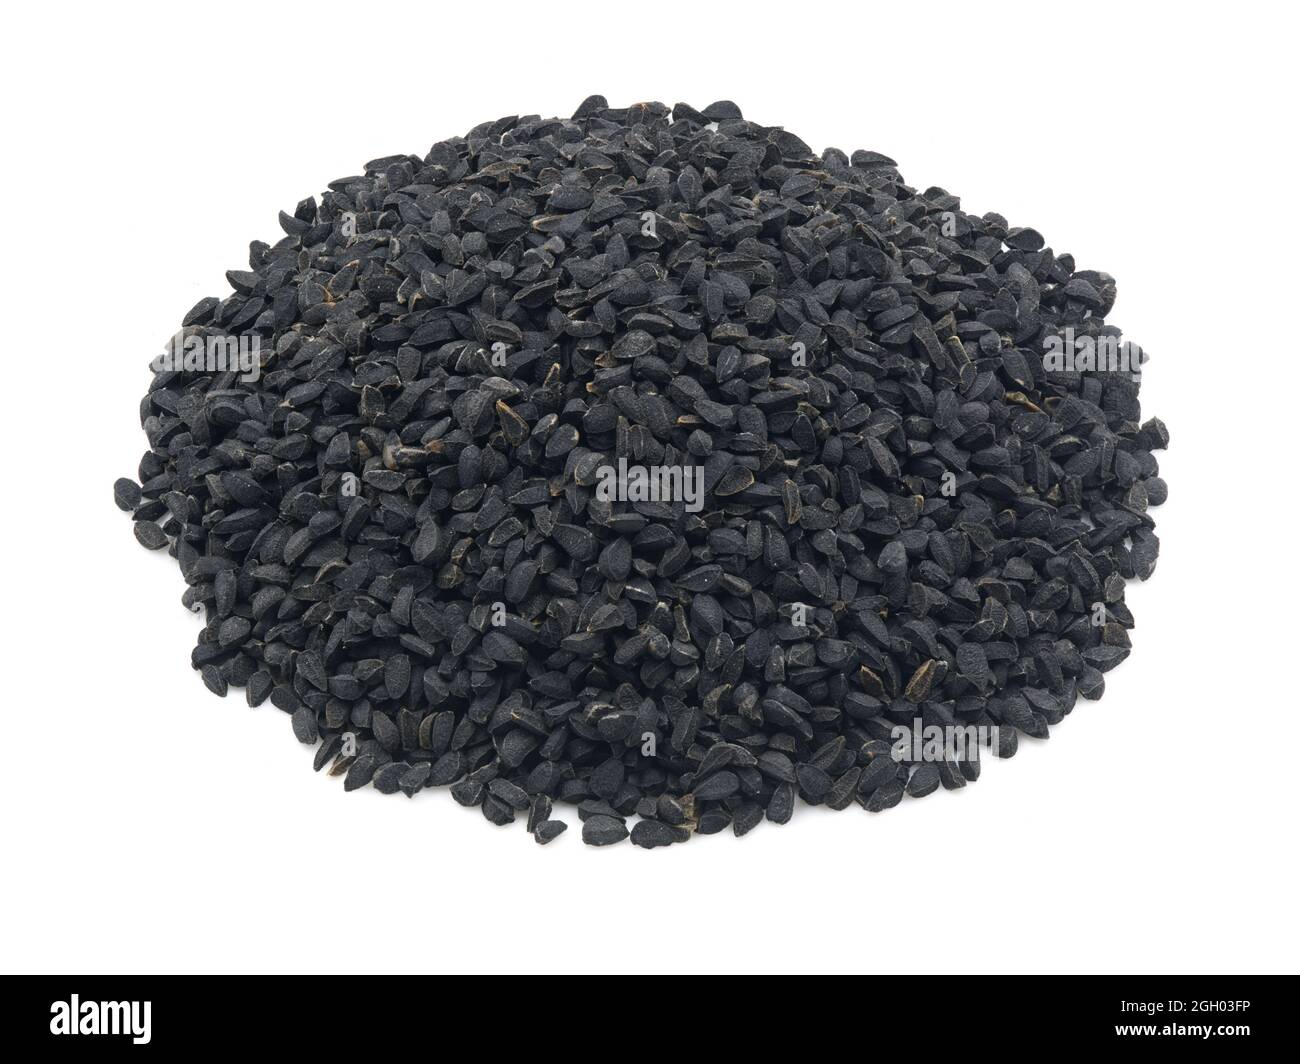 Heap of black cumin or black caraway seeds on a white background. Also called kalonji seeds. Stock Photo